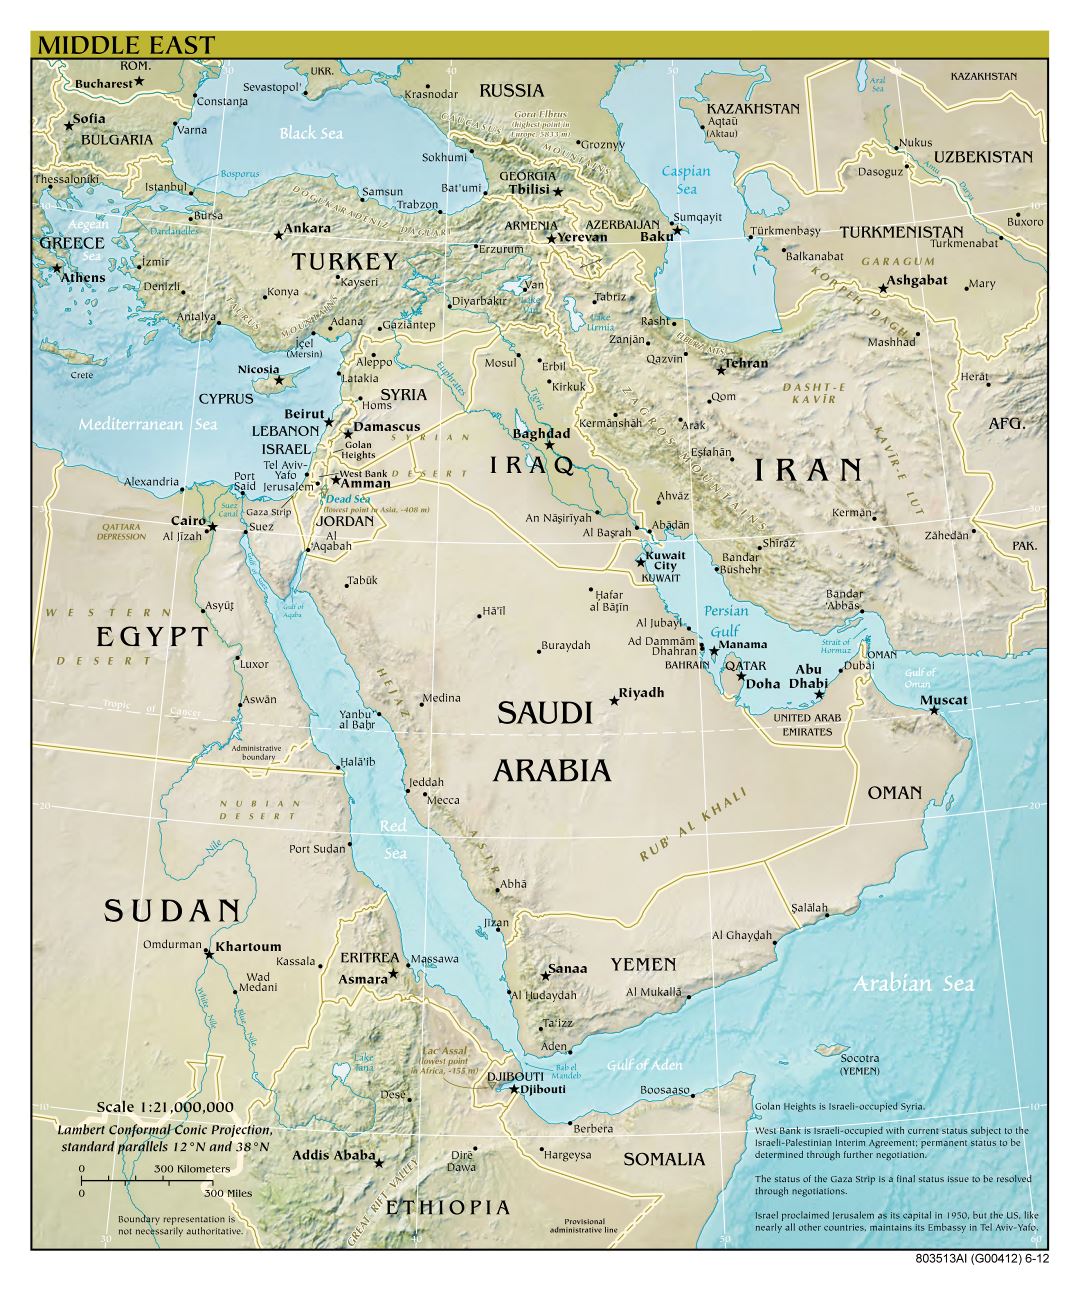 Large scale detailed political map of the Middle East with relief, major cities and capitals - 2012